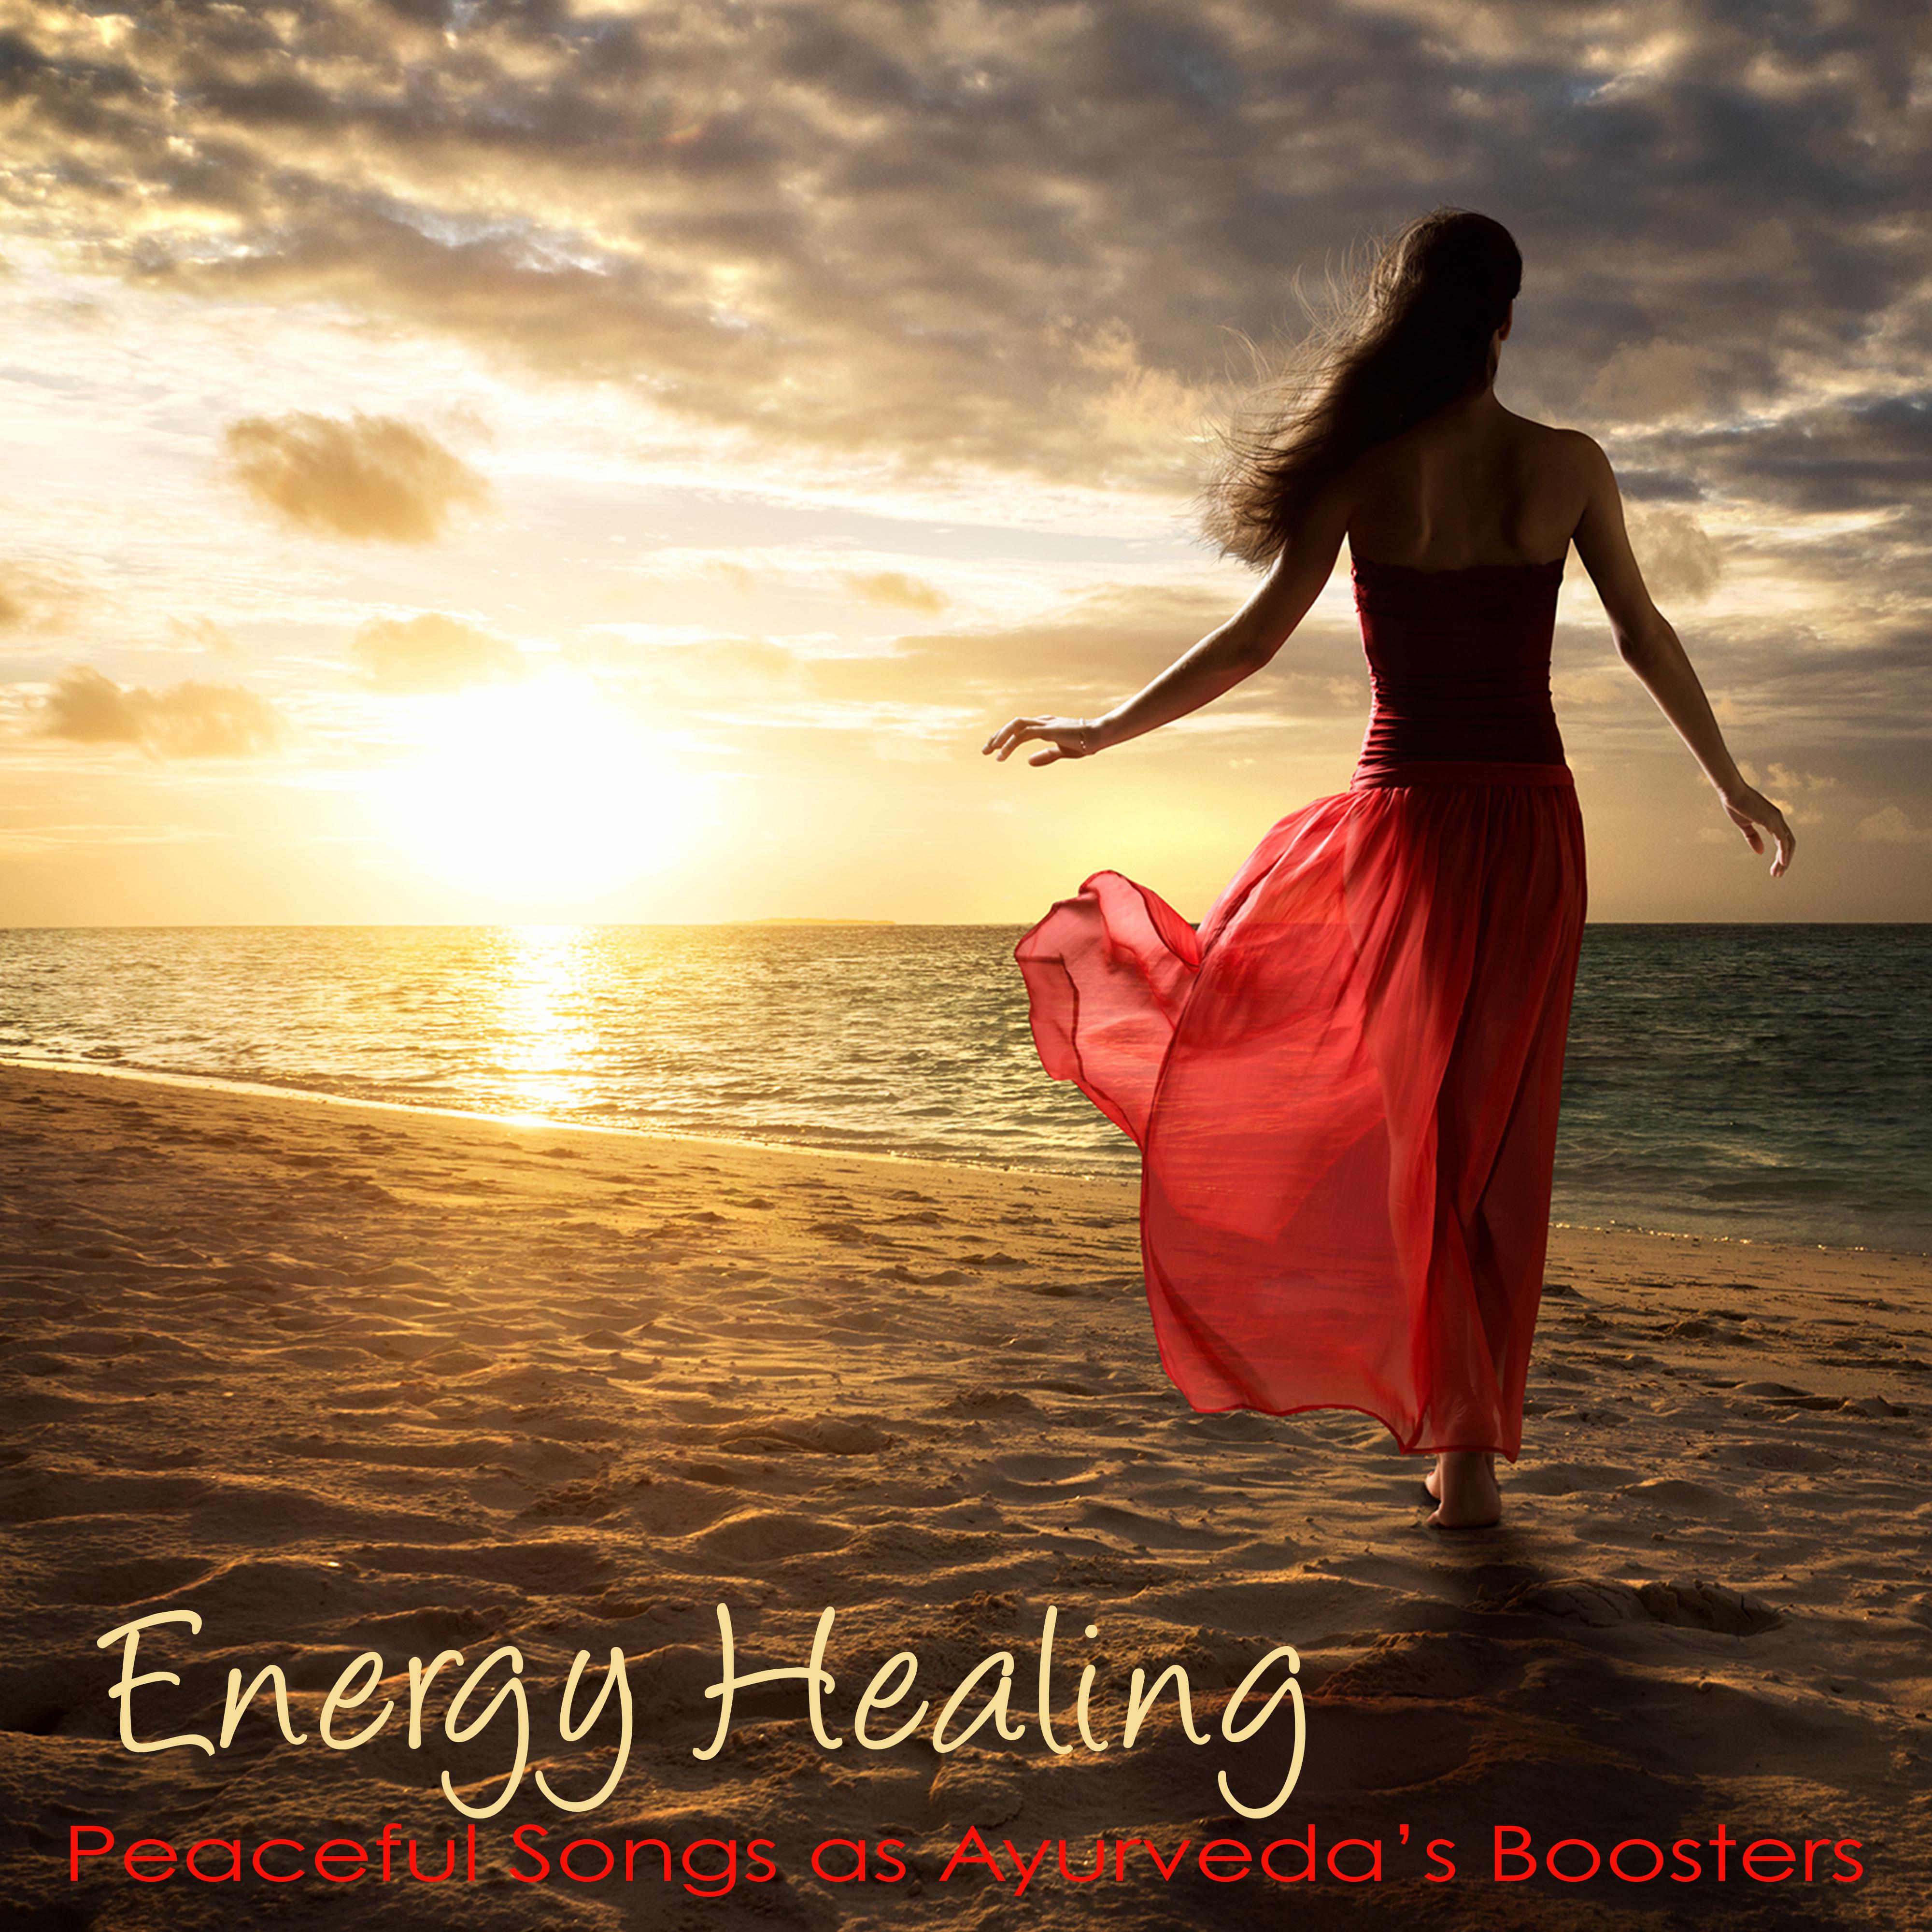 Energy Healing - Peaceful Songs as Ayurveda’s Boosters That Can Give You the Vitality and Inner Strength You Need to Live a Truly Productive, Joyful Life